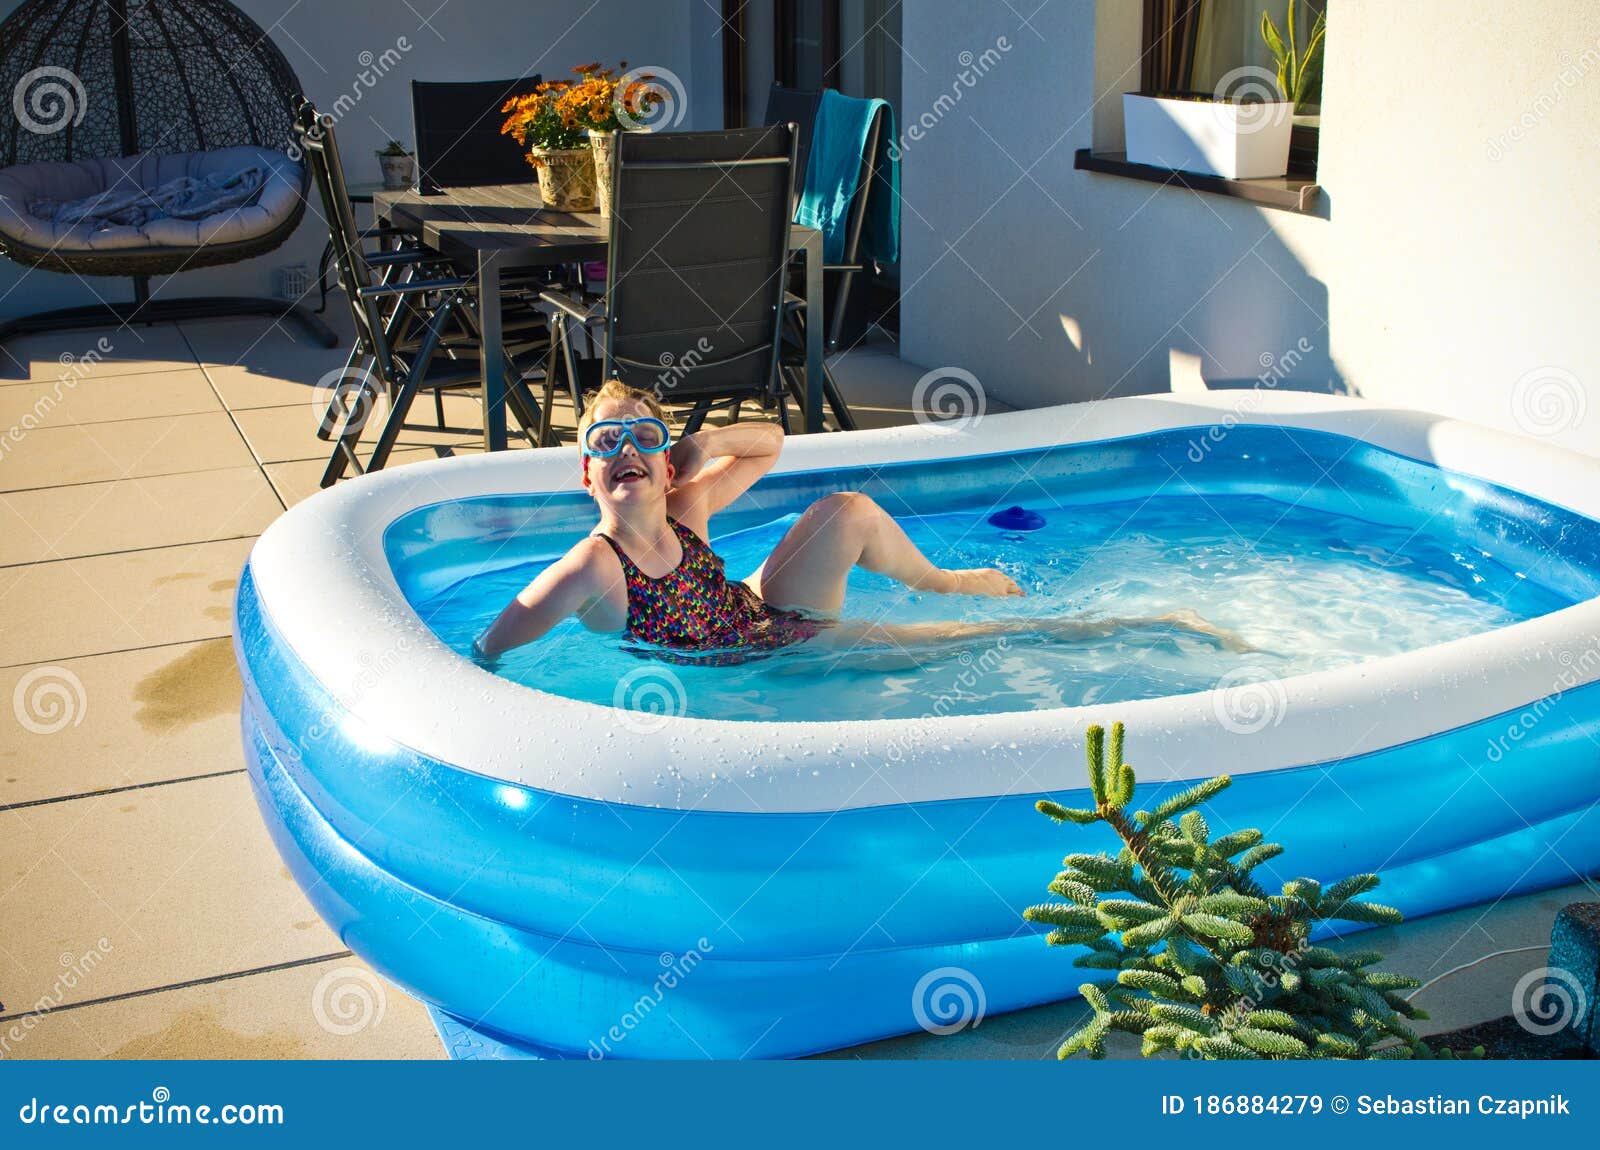 young girl swimming in inflatable swimming pool on home backyard terrace. staycation sta home concept